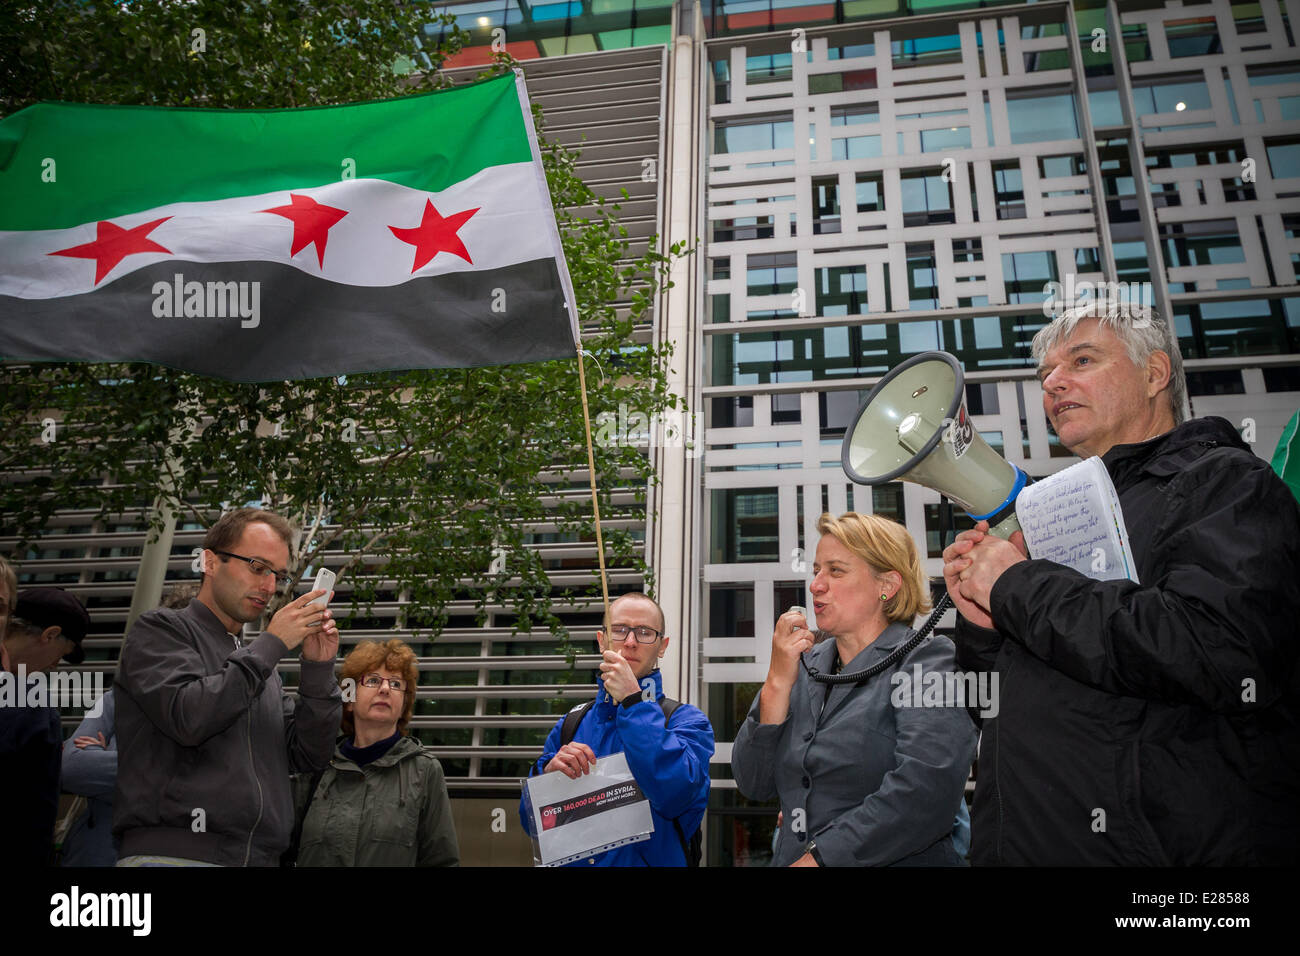 London, UK. 16th June, 2014. Syrian Refugees Welcome Here - awareness protest rally in London Credit:  Guy Corbishley/Alamy Live News Stock Photo